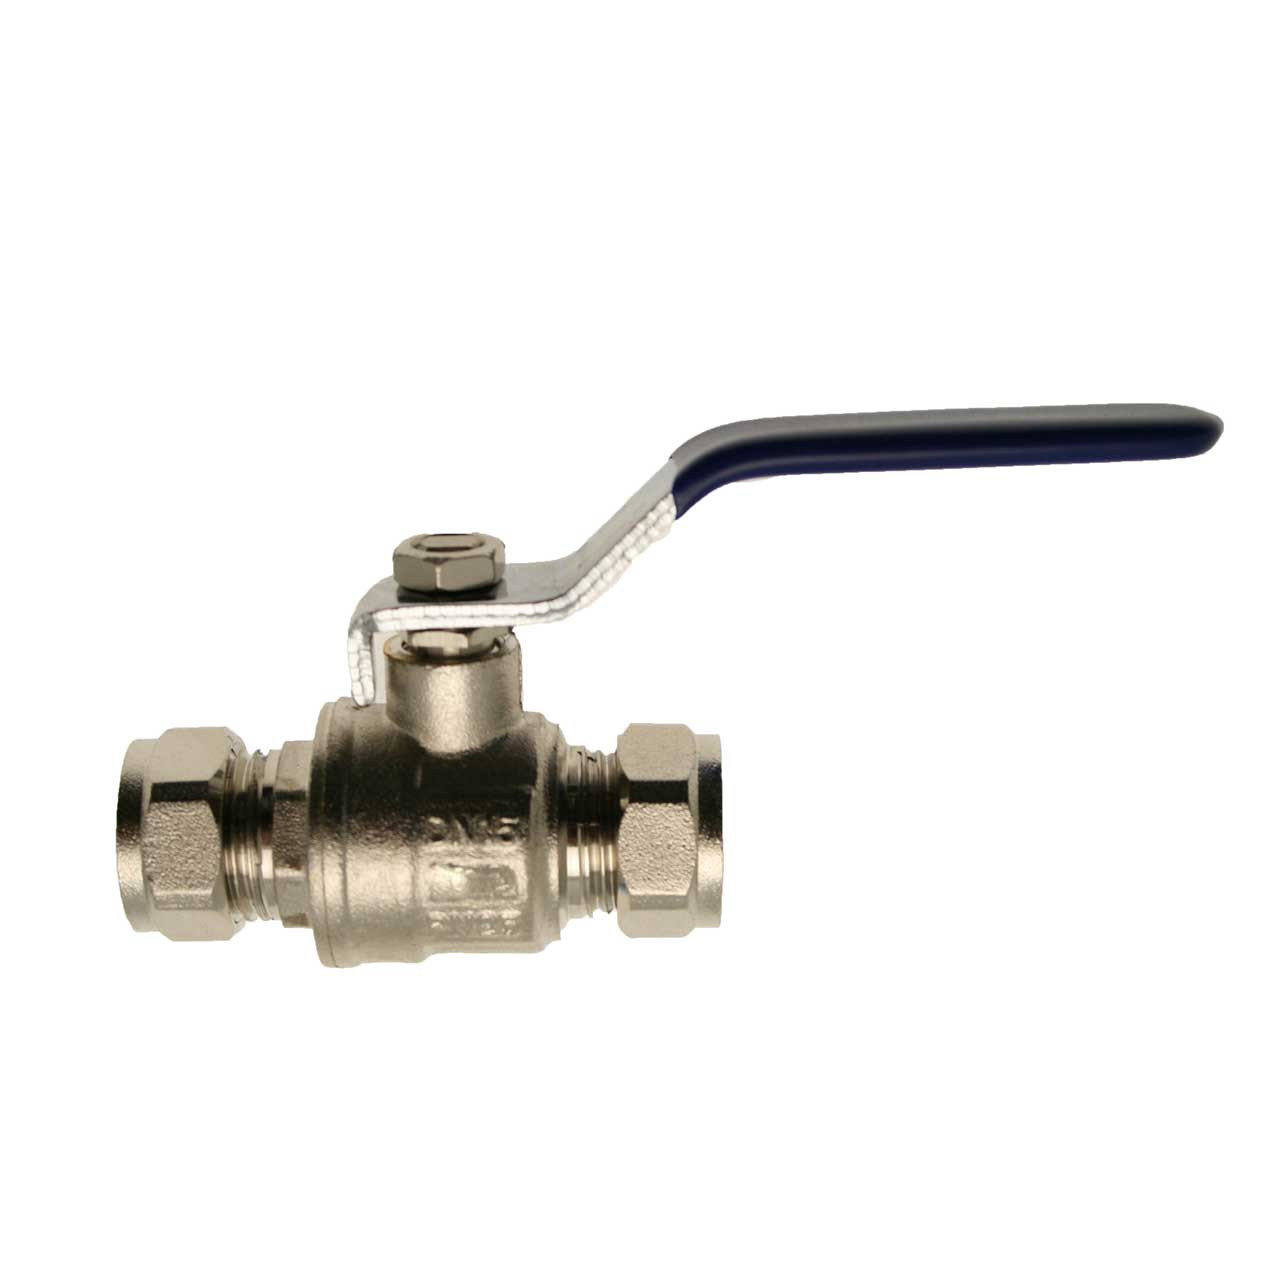 Photograph of Embrass 22mm Lever Handle Ball Valve Blue Wras Approved